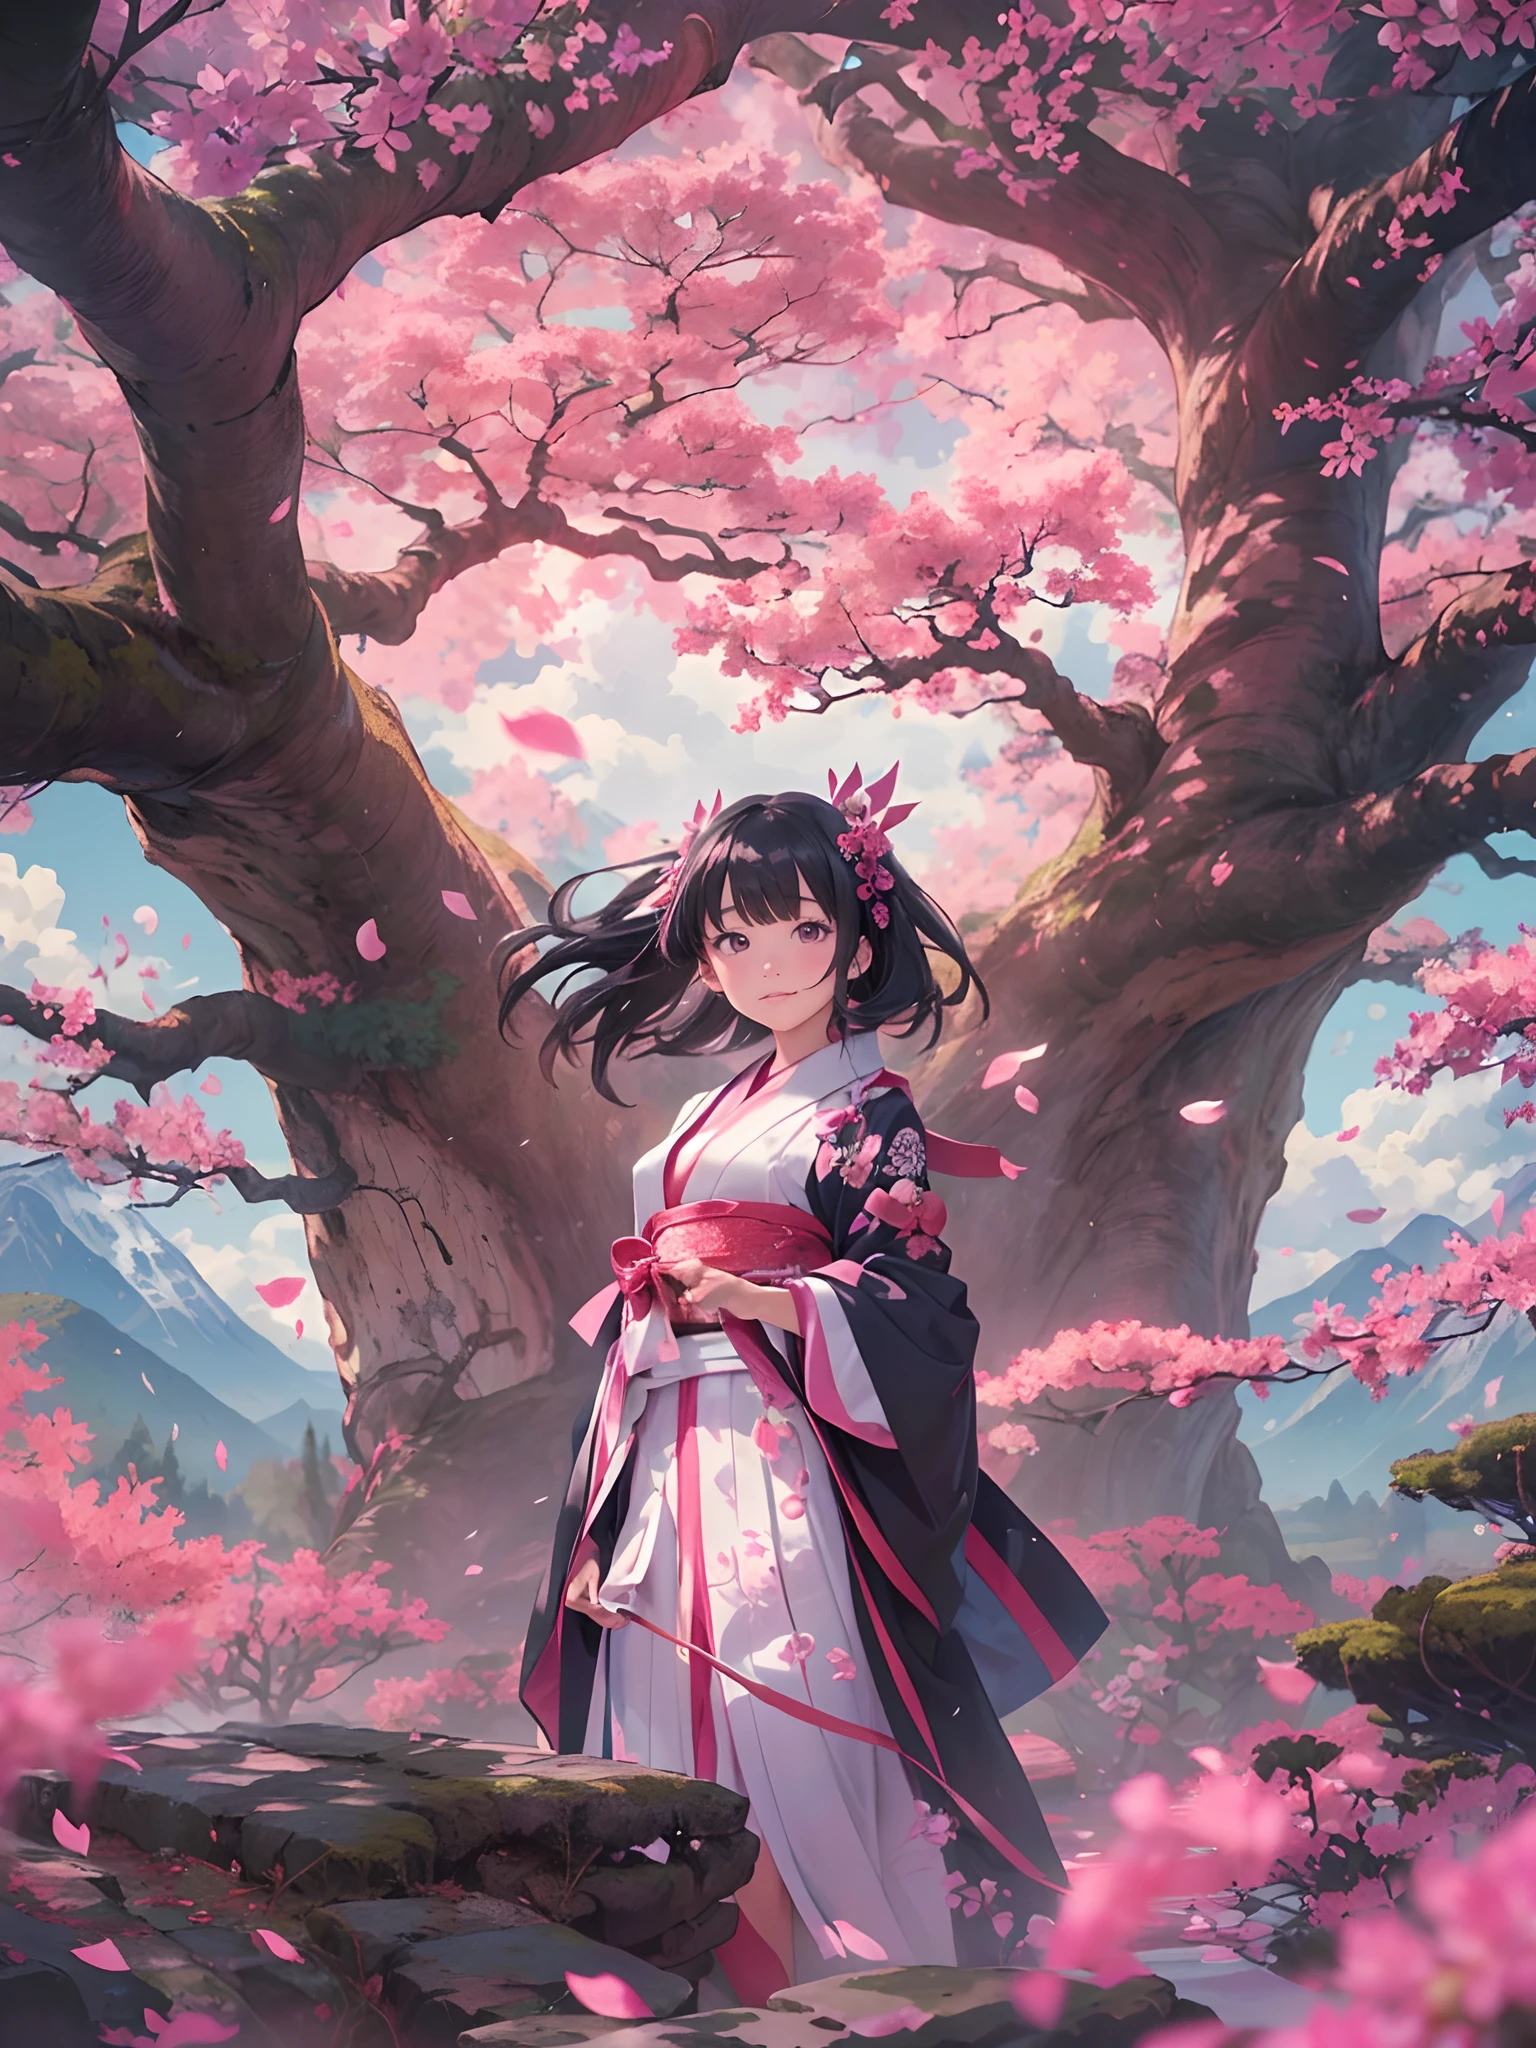 (Best Quality, masutepiece),(1girl in, shrine maiden, Black eye, view front ,Black hair, Walking, Upper body), (Labyrinth of the Night, Huge old tree behind, Glowing pink petals on background, Shrine behind, mountain background, Blowing wind, Meteor clouds)